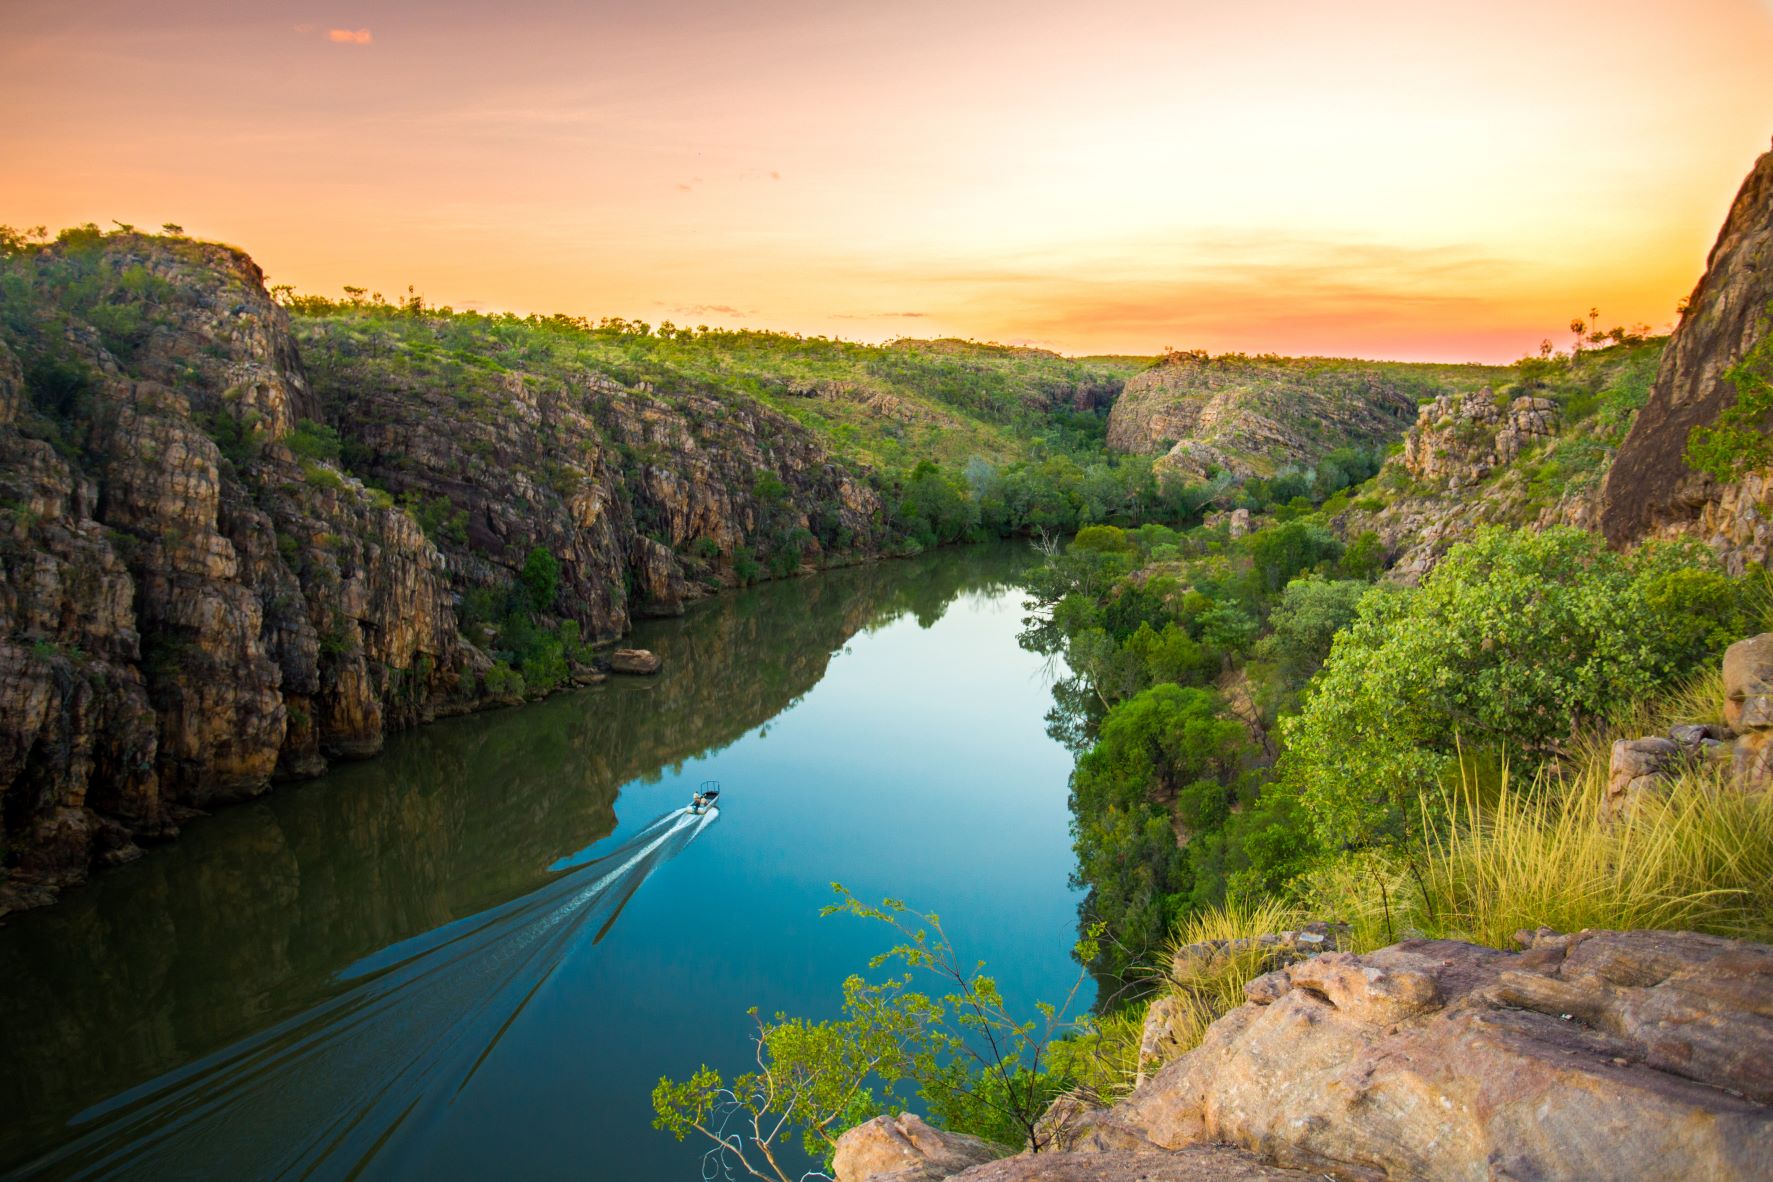 købmand Termisk platform 8 Reasons to Visit the Northern Territory's Top End | Discovery Parks